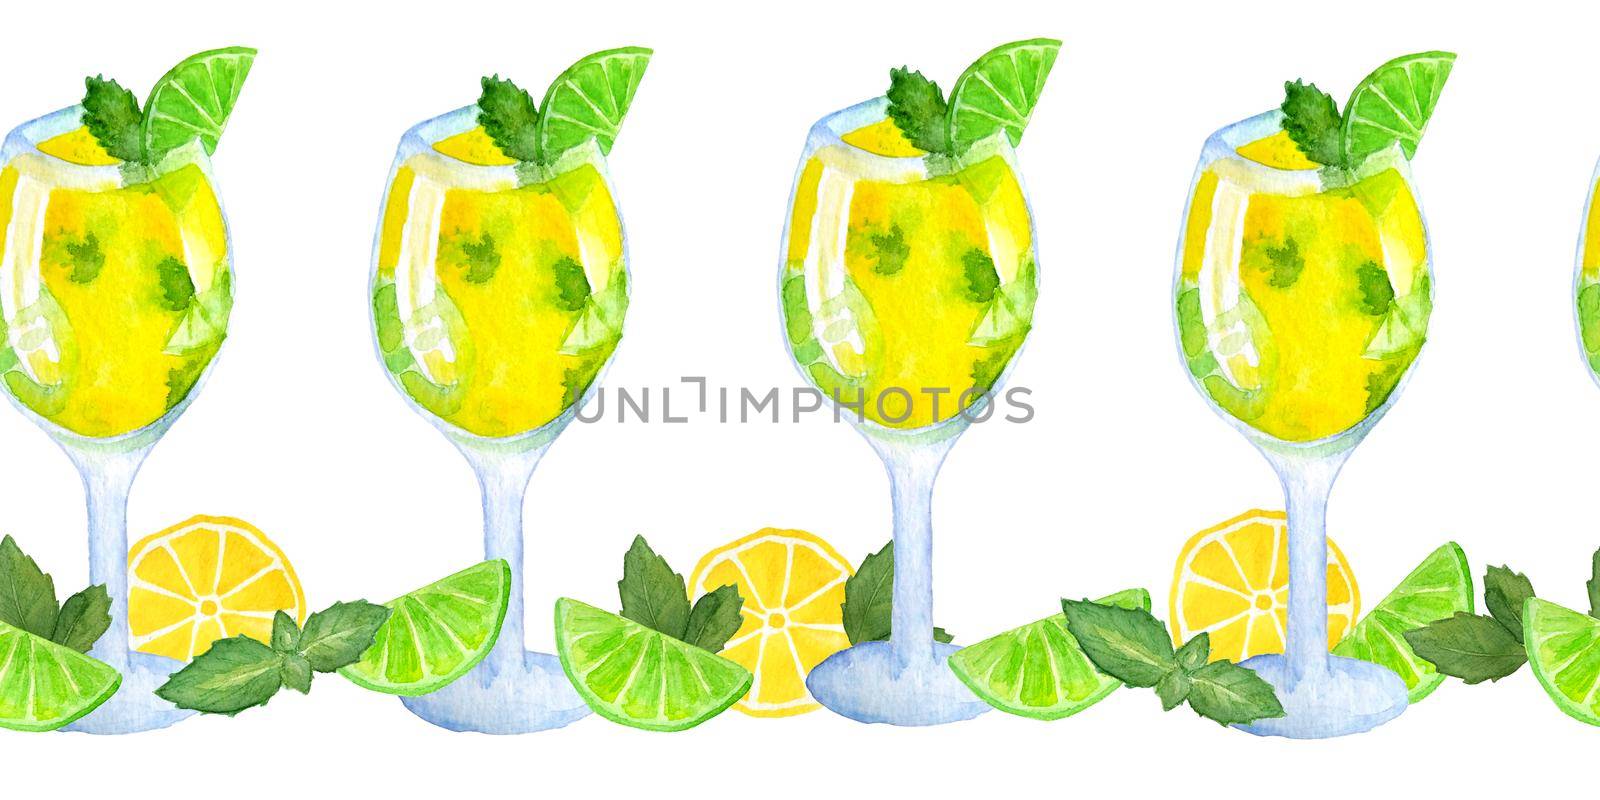 seamless watercolor hand drawn horizontal border with green yellow cocktail mojito mint lime citrus slices vibrant intense tropical summer colors. Alcoholic beverages for restaurant cafe food drink glass